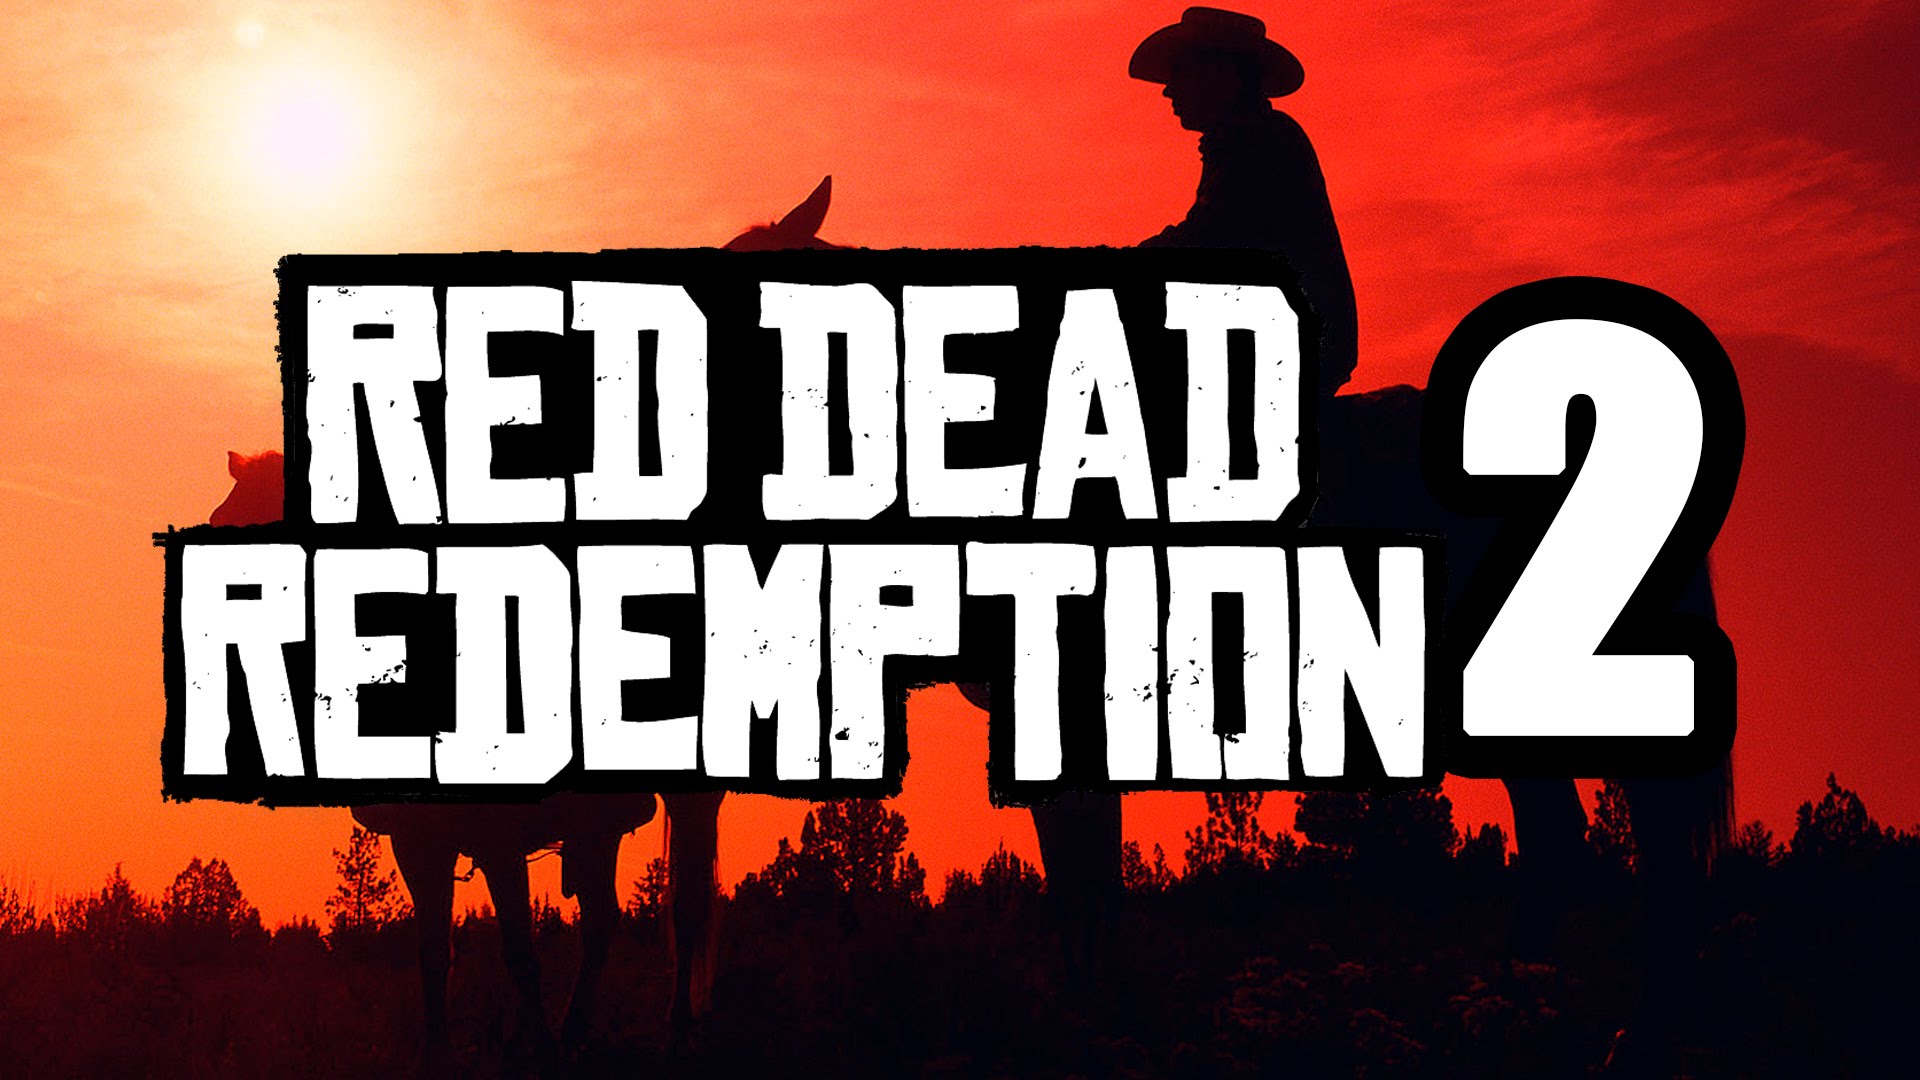 Video Game Red Dead Redemption 2 HD Wallpaper